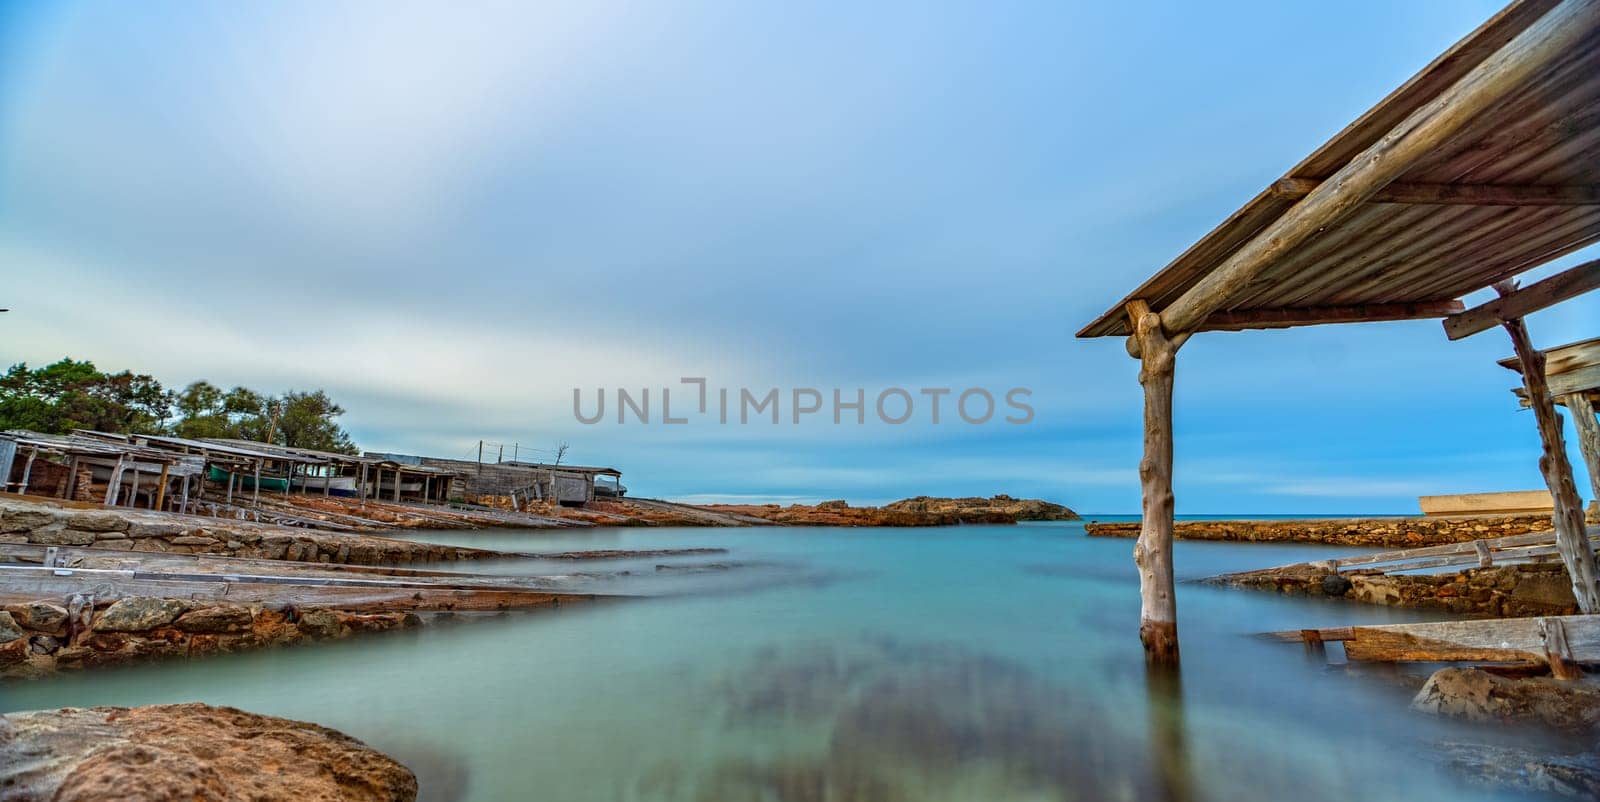 Long exposure shot of a historic dock with rails for launching fishing boats into a clear sea under cloudy skies.